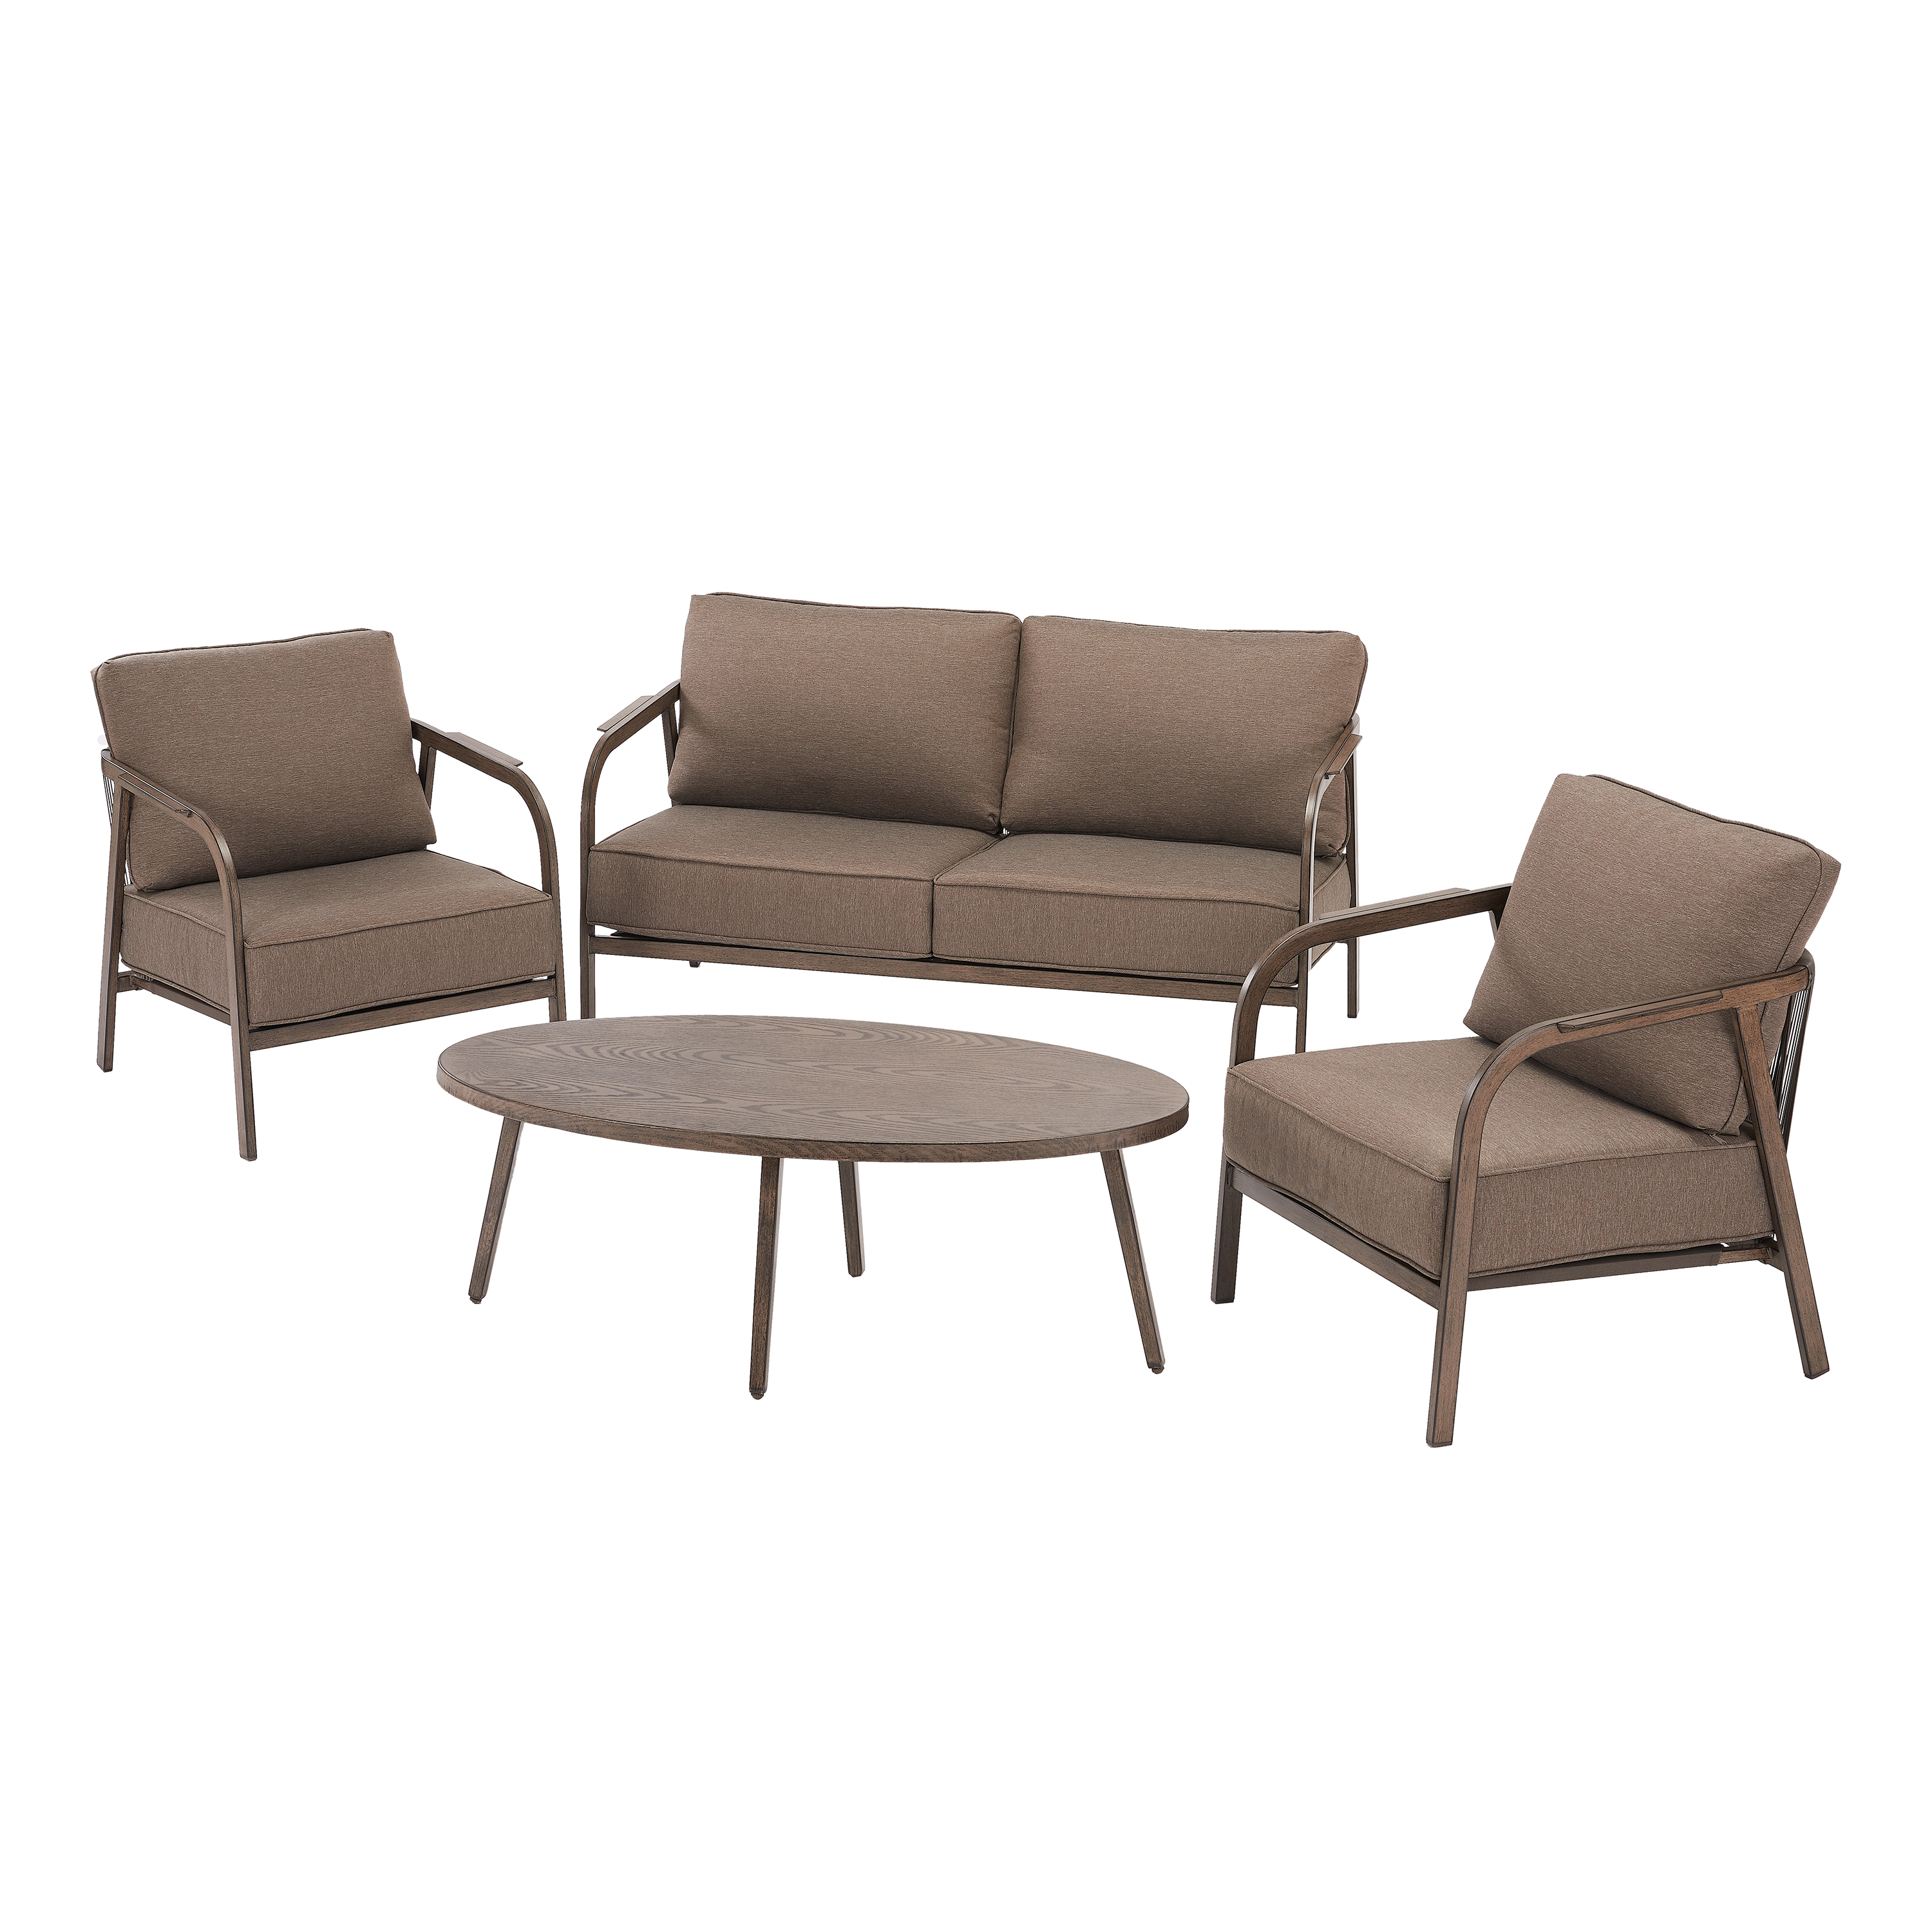 Better Homes & Gardens Arlo 4-Piece Patio Loveseat Set with Beige Cushions - image 4 of 8